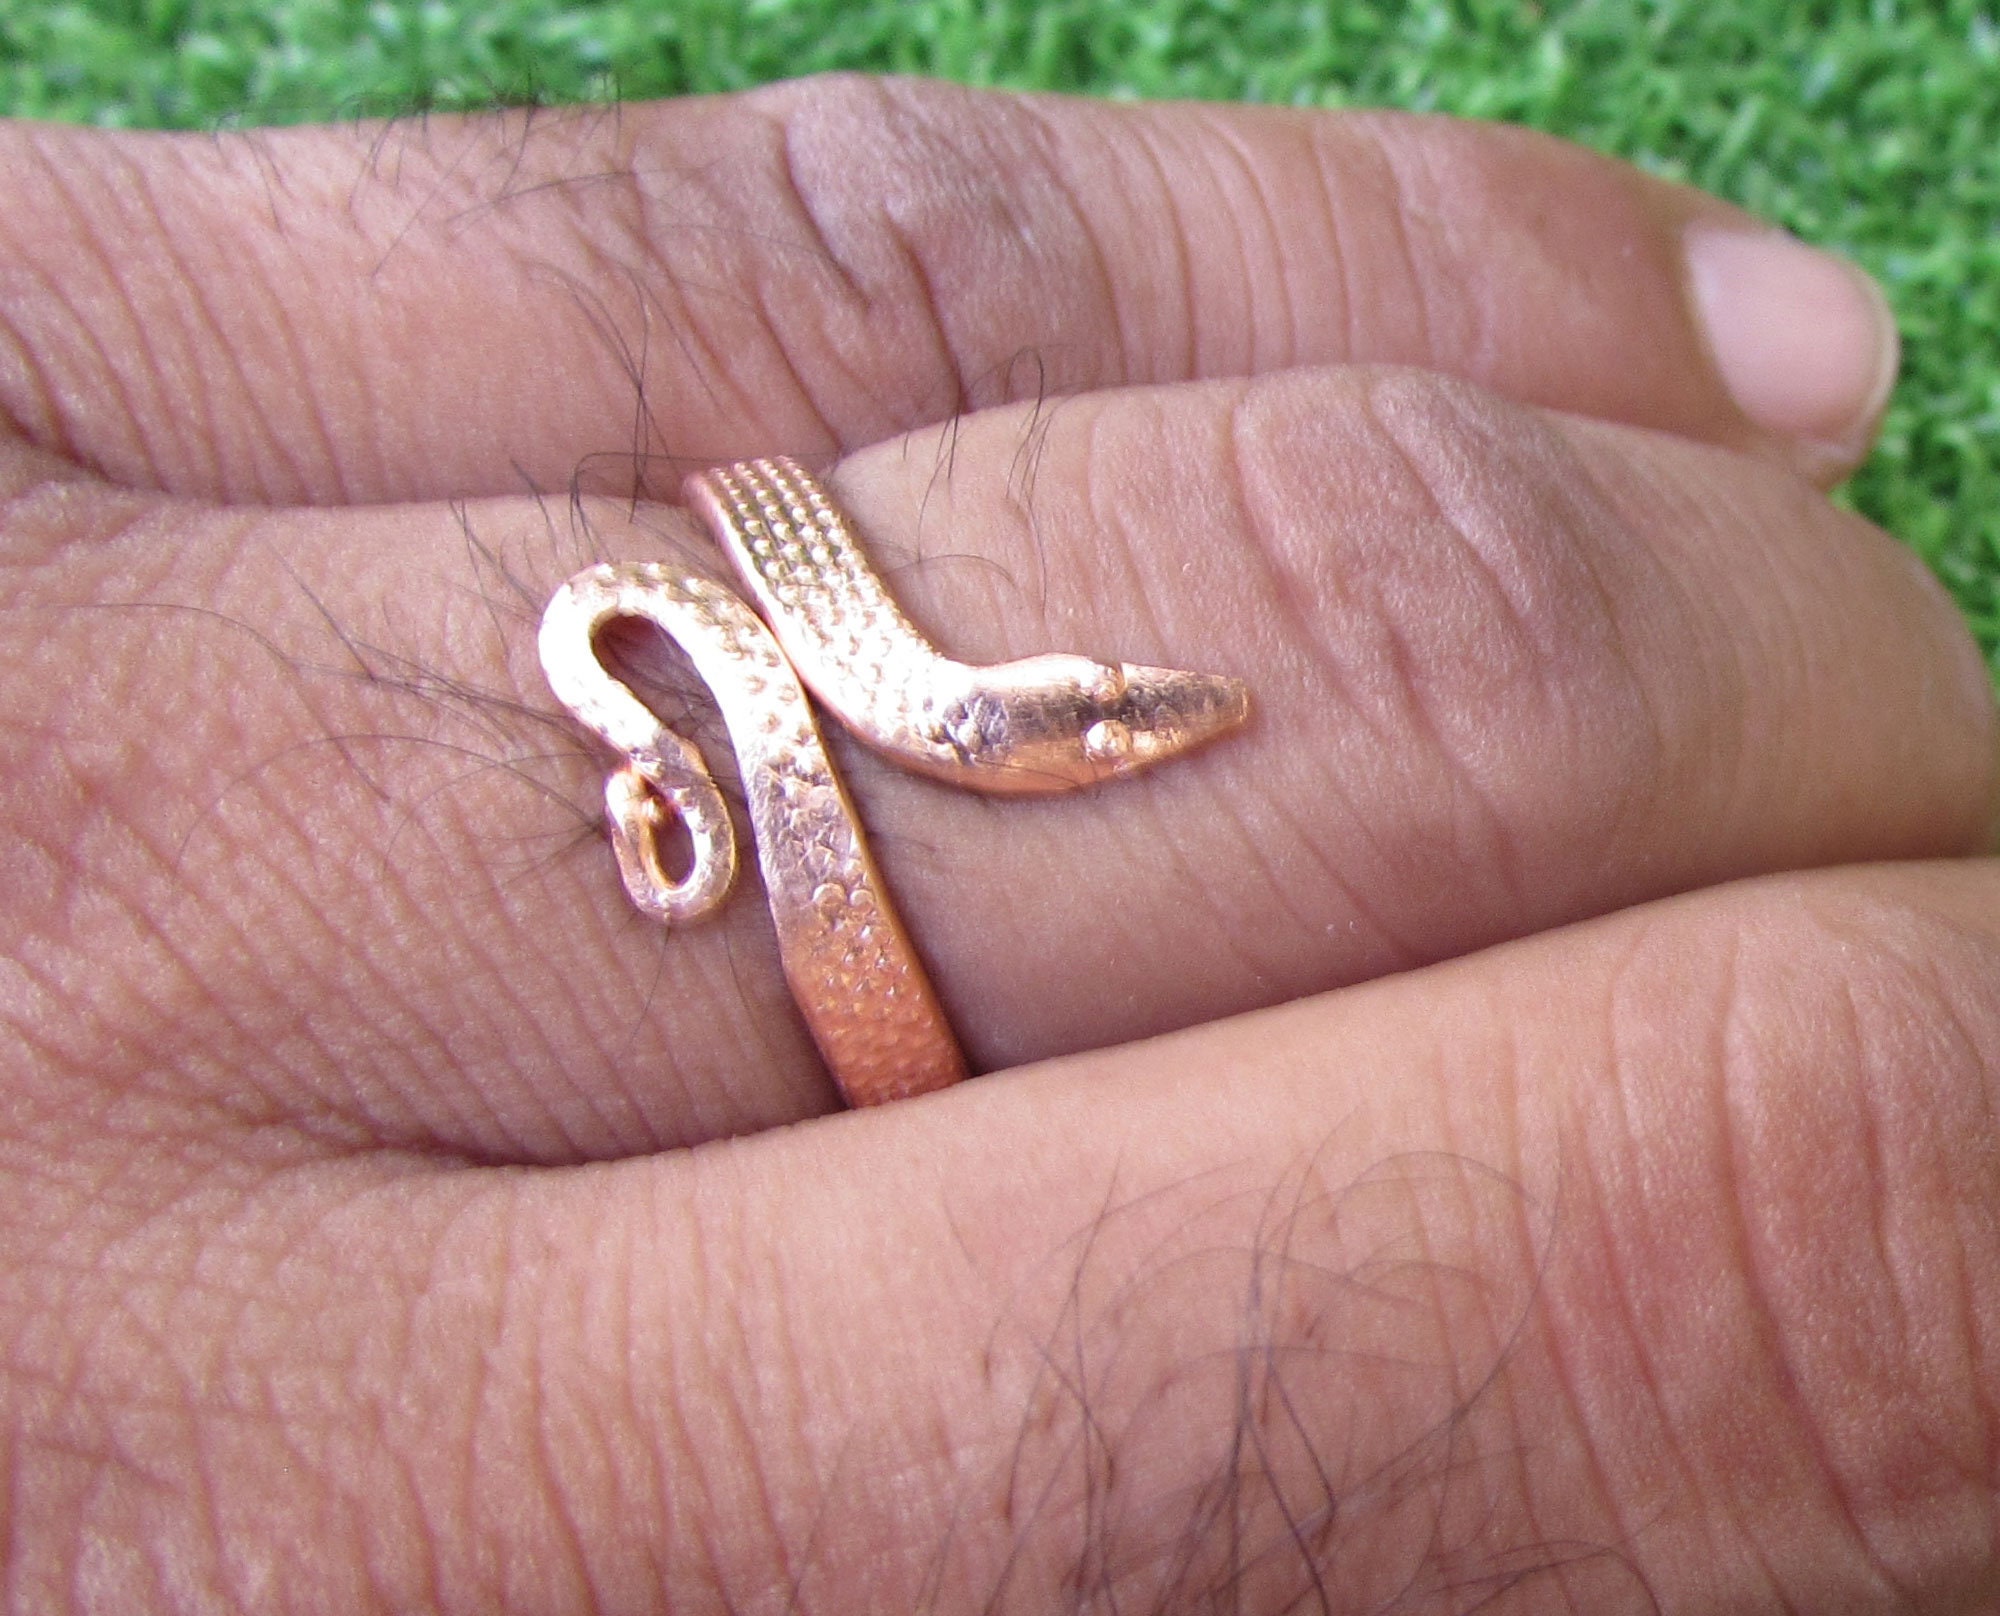 Copper Band Textured Spiral Rings Arthritis Ring Healing Ring Birthday Gift  Girlfriend Anniversary Gift Pure Copper Ring - Etsy